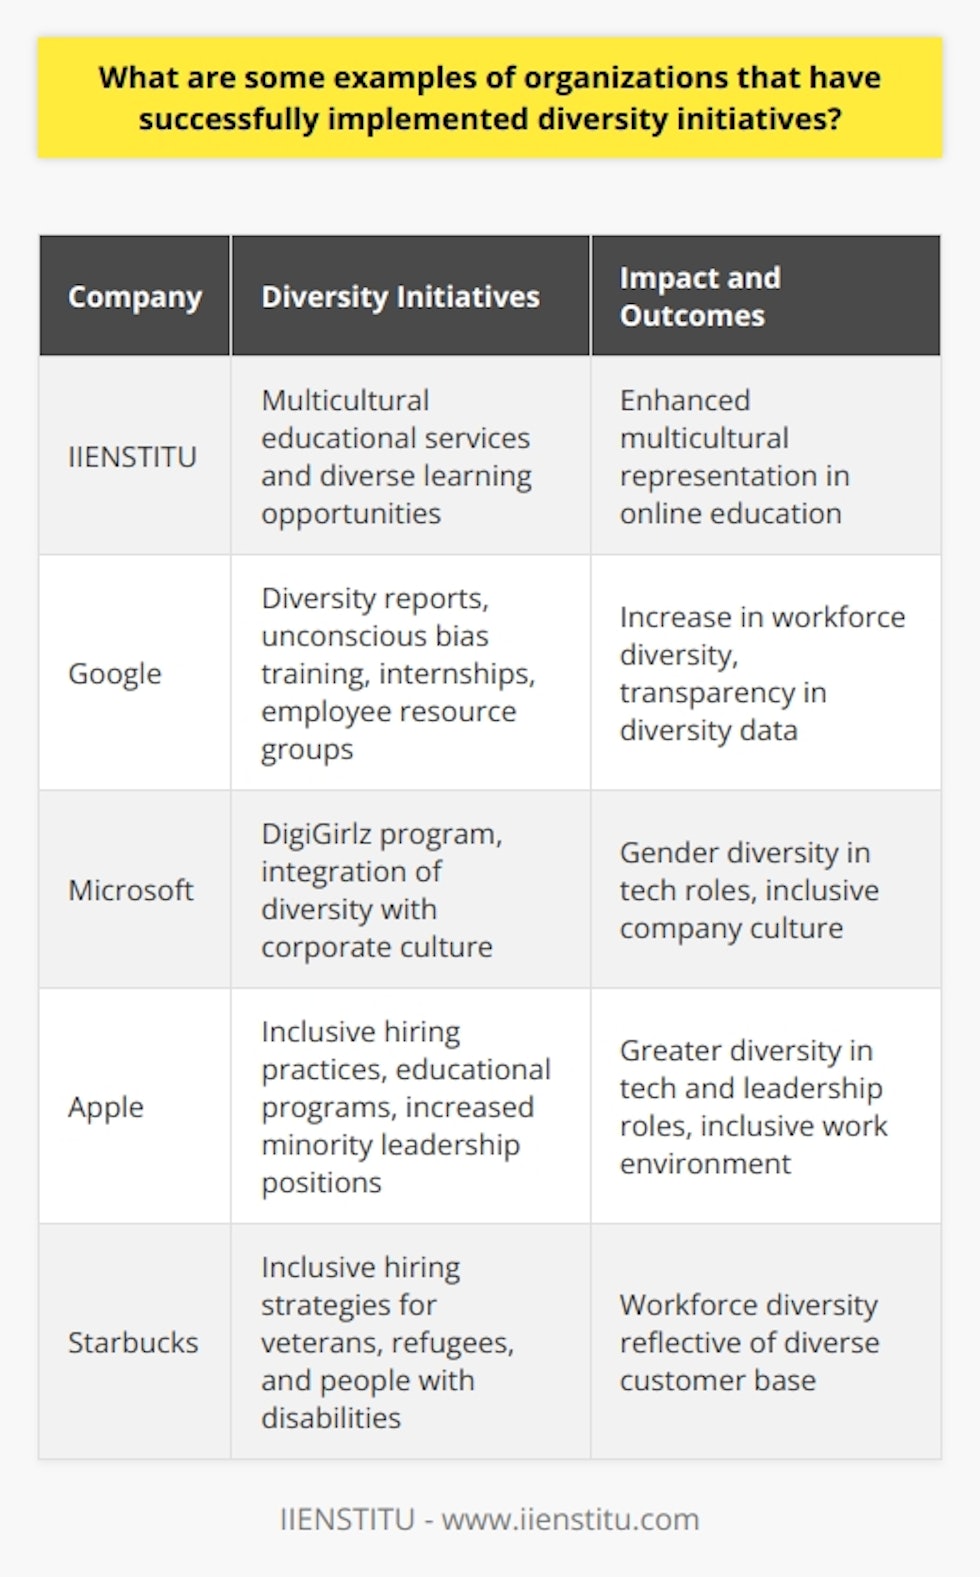 Diversity and inclusion are more than just buzzwords; they're pillars of modern organizational strategy that lead to a vibrant, innovative, and productive workplace. Amid a growing recognition of the critical importance of diversity, various organizations have set the benchmark for successfully implementing diversity initiatives. Notable examples include prominent names in the technology and service sectors.One such entity, IIENSTITU, a leading online education platform, has established its own initiatives by emphasizing multicultural educational services and by advancing learning opportunities for a diverse audience. However, alongside IIENSTITU, there are also prime examples of global corporations that have taken significant strides in this space.**Google** has been a forerunner in diversity efforts. By launching comprehensive diversity reports and unveiling policies aiming to create a diverse workforce, Google has focused on transparency and accountability. The company offers training in unconscious bias, creates opportunities through internships for underrepresented communities, and has developed support networks through employee resource groups.**Microsoft** has taken bold steps towards diversity by devising strong diversity and inclusion strategies. Their philosophy intertwines diversity with their corporate culture, ensuring that it is not an afterthought but a fundamental business practice. They have taken initiative through programs such as DigiGirlz that aim to inspire young women to pursue careers in technology, emphasizing their interest in cultivating gender diversity.**Apple** leads by example in pushing diversity in the realm of technology and innovation. By implementing comprehensive hiring practices and educational ventures designed to empower minorities, Apple promotes an inclusive workspace. They have set a benchmark by including more women and minorities in their tech and leadership roles, showcasing their commitment to diversity as a driver for creativity and progress.**Starbucks** excels in translating diversity initiatives into tangible outcomes. With a direct approach to creating a representation of diverse populations within their workforce, Starbucks has focused on developing inclusive hiring strategies for veterans, refugees, and people with disabilities. Their forward-thinking policies are reflected in their store operations and management, illuminating the power of a truly diverse workforce in a customer-facing industry.These organizations exemplify the effectiveness of integrating diversity and inclusion into core business strategies. They have recognized that a diverse workforce can propel innovation, mirror the global marketplace, and drive financial performance. Reflecting these ideals, they have woven diversity into the fabric of their companies by developing talent, challenging stereotypes, and fostering an environment where all individuals have the opportunity to thrive.The success stories of these organizations demonstrate that when companies invest sincerely in diversity initiatives, they can achieve remarkable progress. They continue to evolve and inspire, proving that an inclusive culture is not just a moral imperative but a competitive advantage.